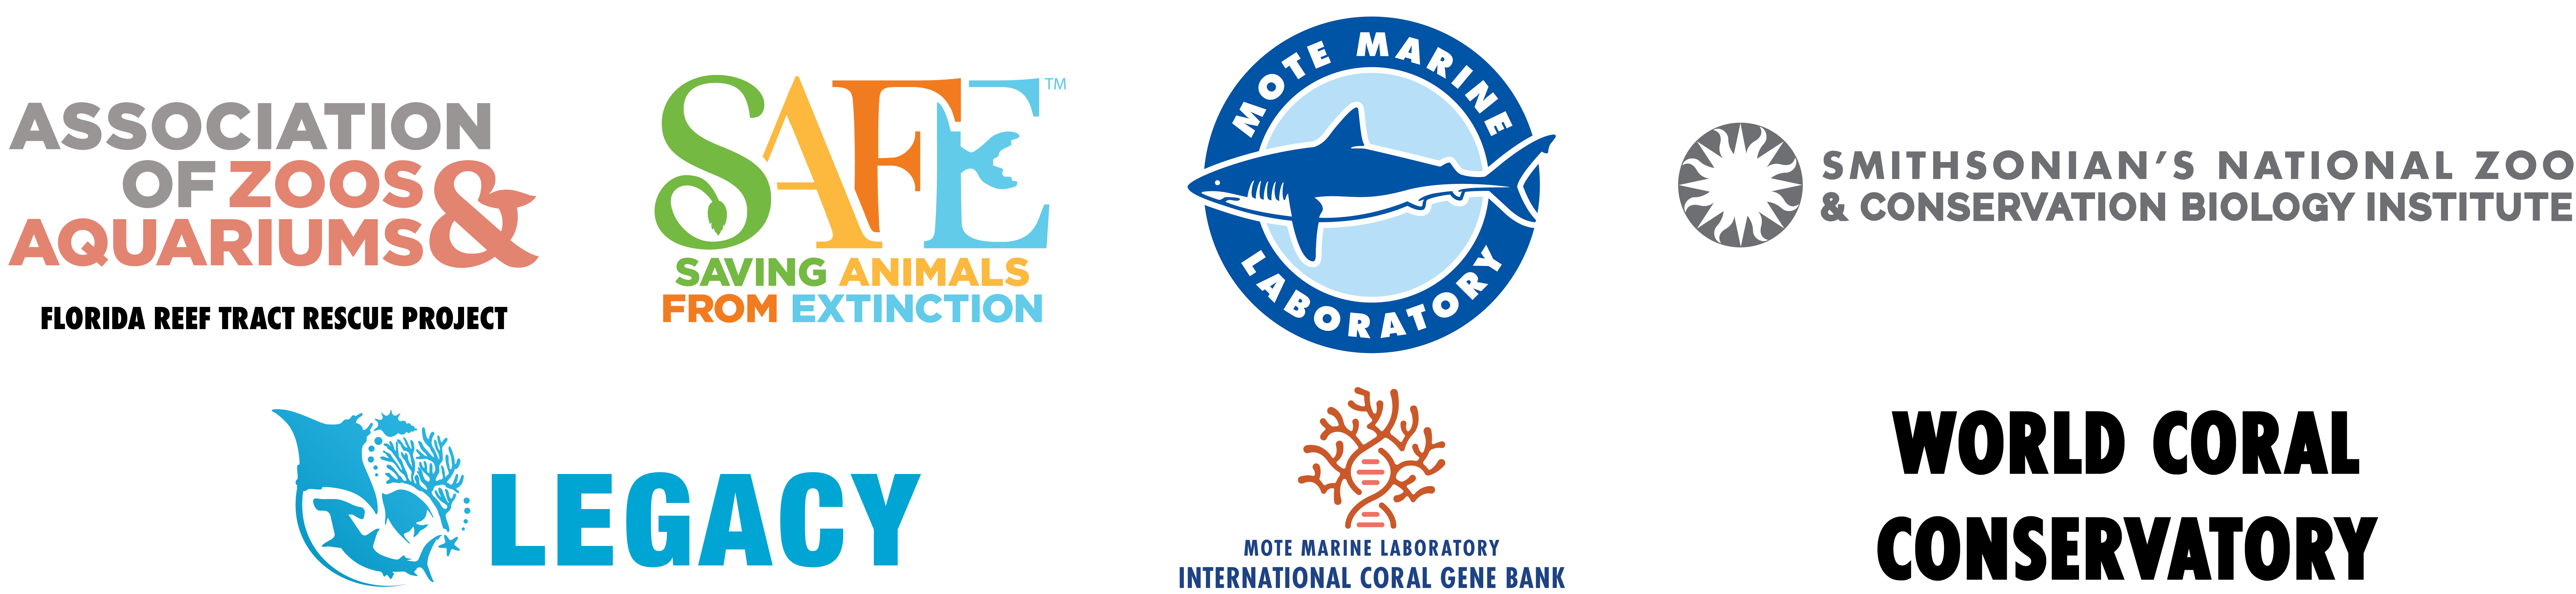 Logos of Coral Biobank Alliance Partners: Association of Zoos & Aquariums Florida Reef Tract Rescue Project, AZA Saving Animals from Extinction, Great Barrier Reef Legacy, Mote Marine Laboratory / Mote's International Coral Gene Bank, Smithsonian Conservation Biology Institute, and World Coral Conservatory